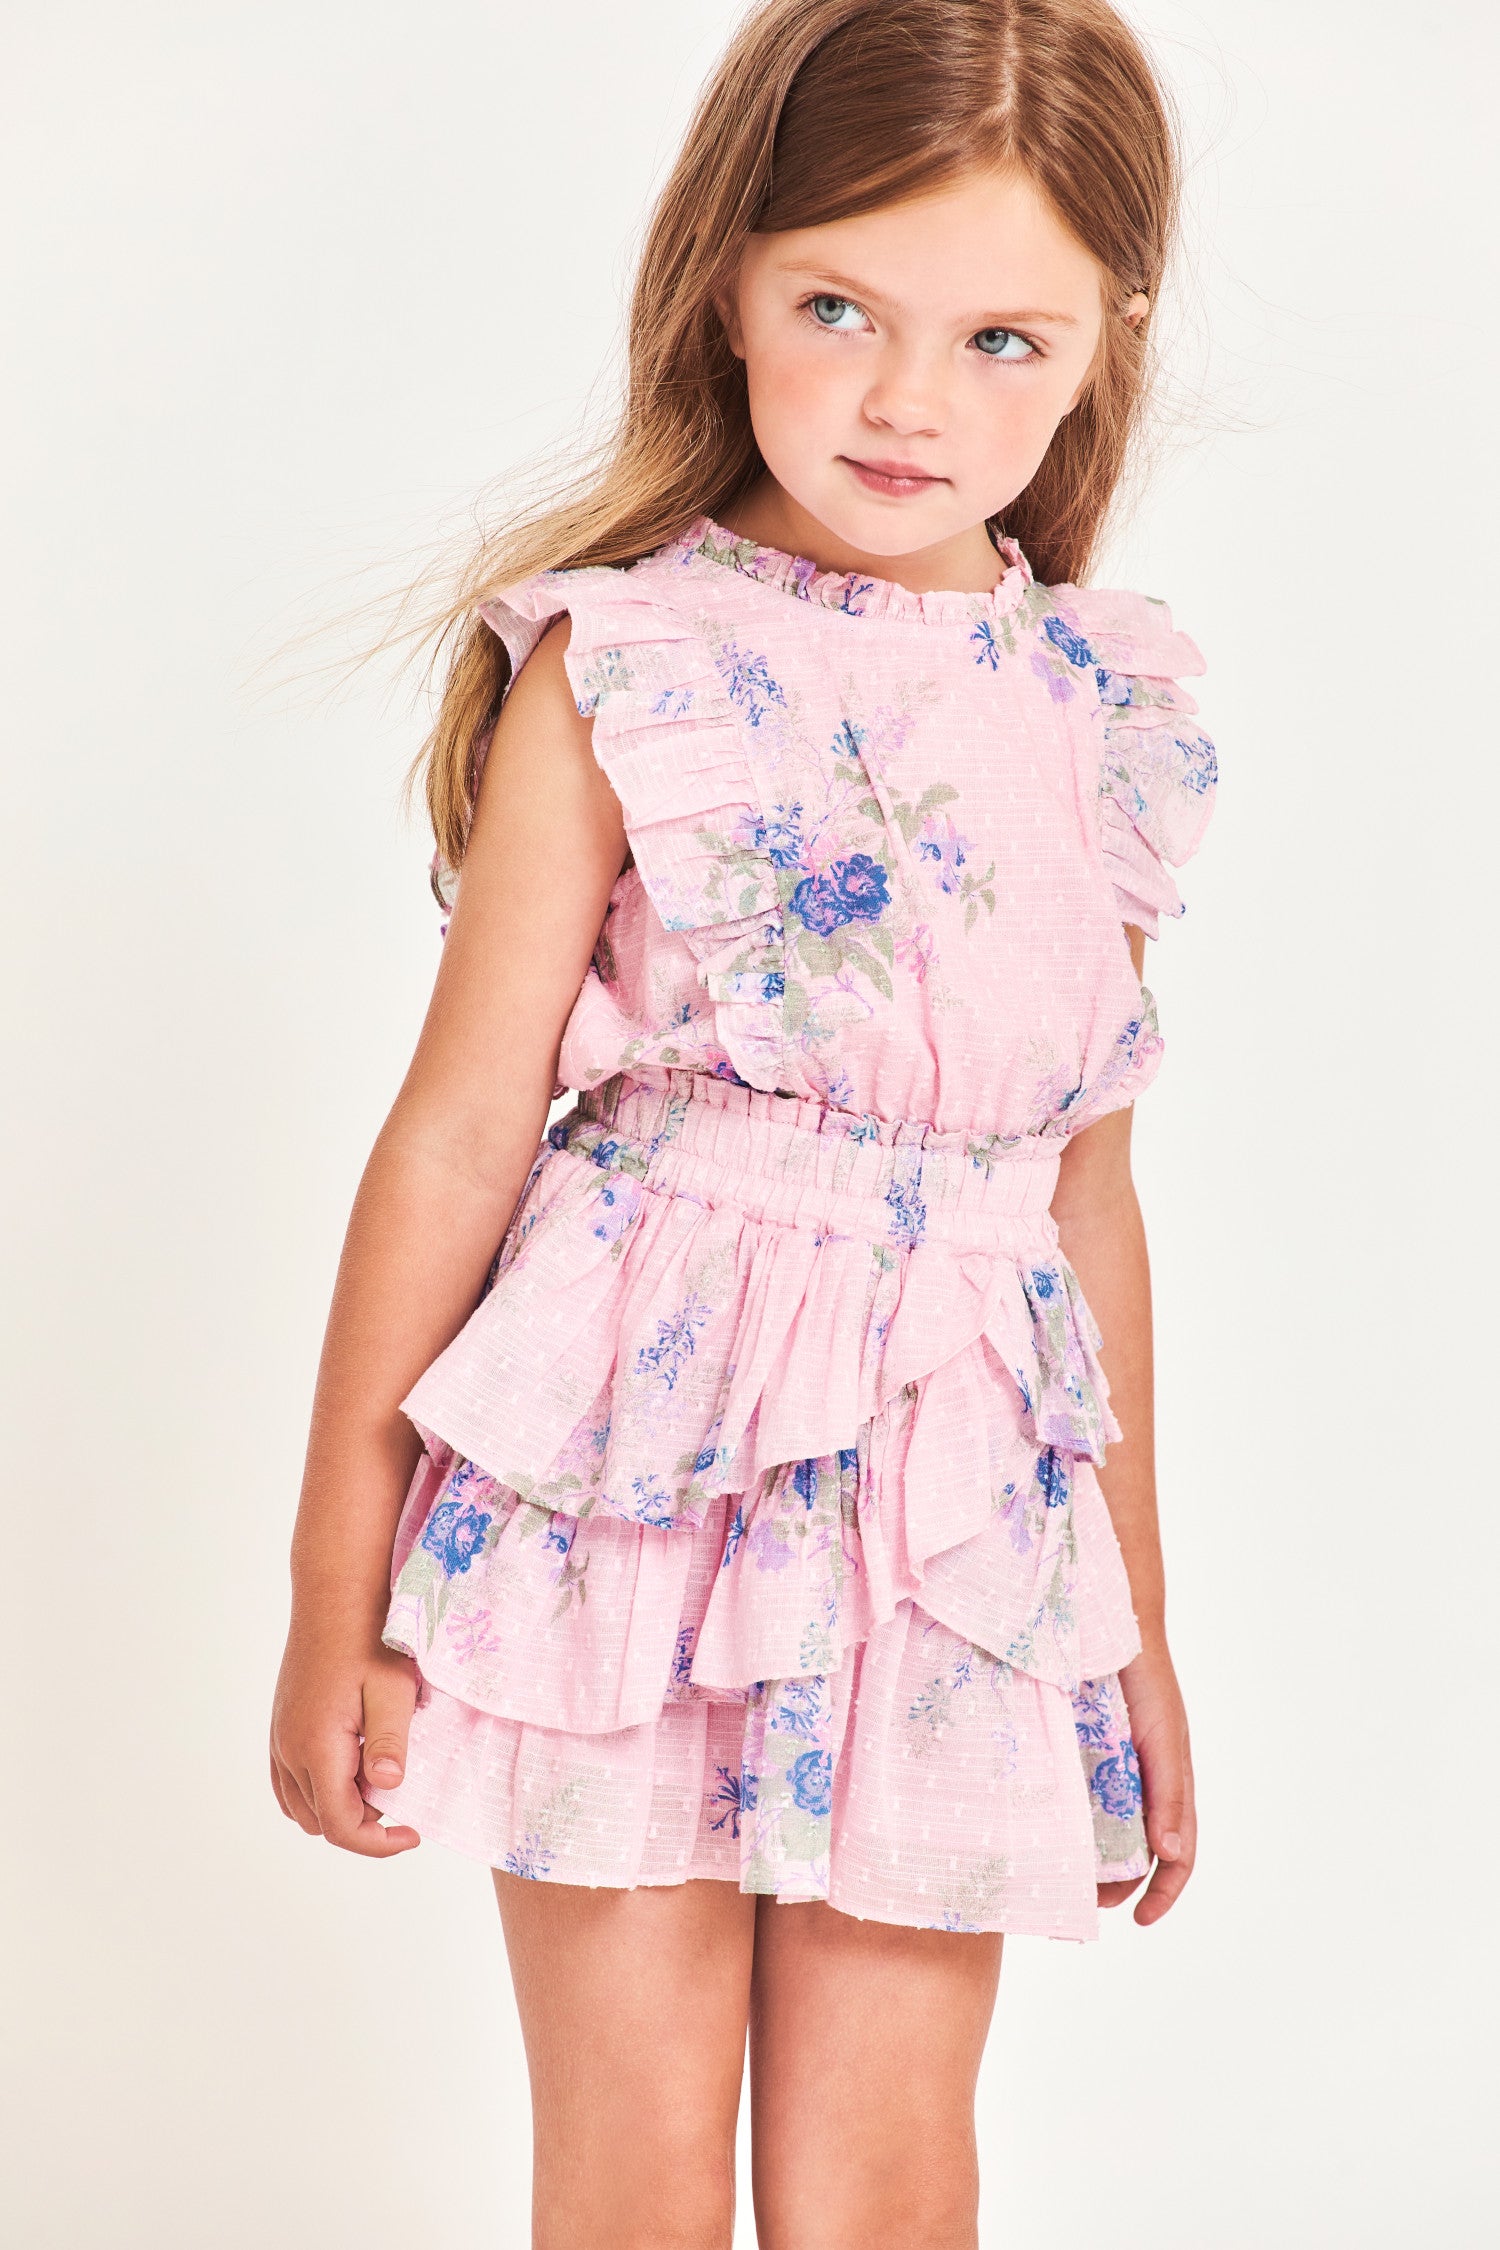 Dress for girls in 100% cotton with custom lace. This easy frock has a ruffle-trimmed collar, buttons down center front, flutter sleeves, an elastic waist and overlapping asymmetrical ruffles at the skirt.